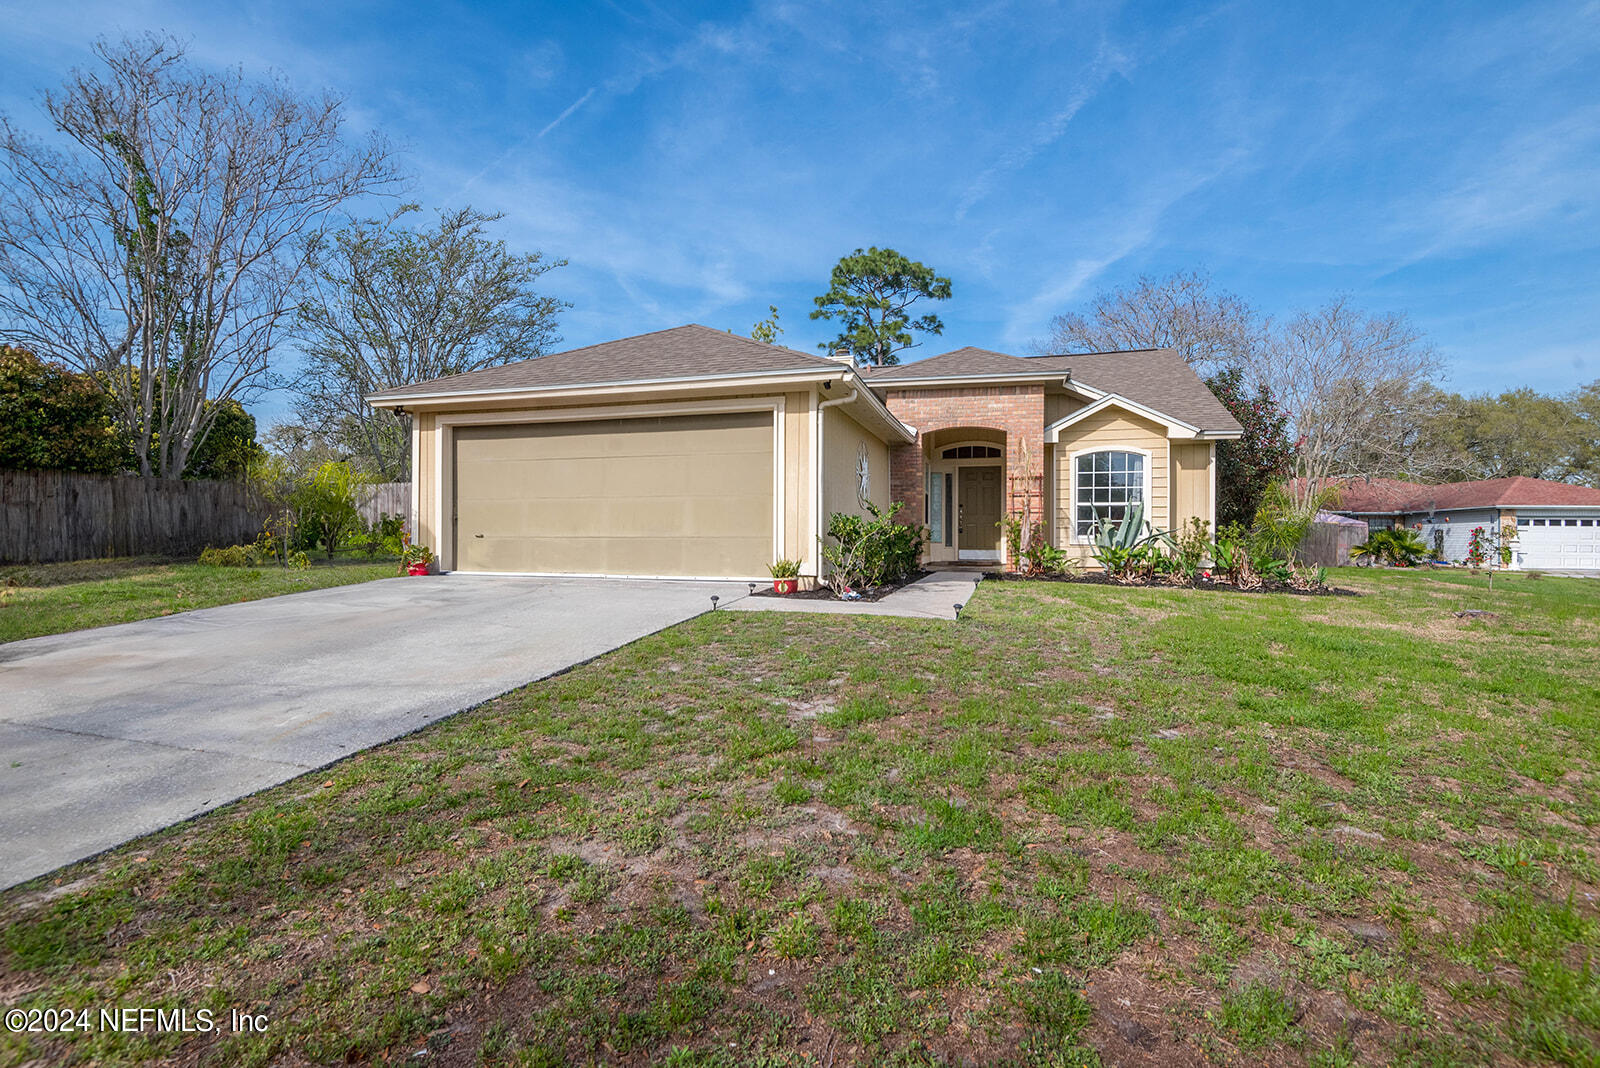 Jacksonville, FL home for sale located at 8621 Bandera Circle S, Jacksonville, FL 32244